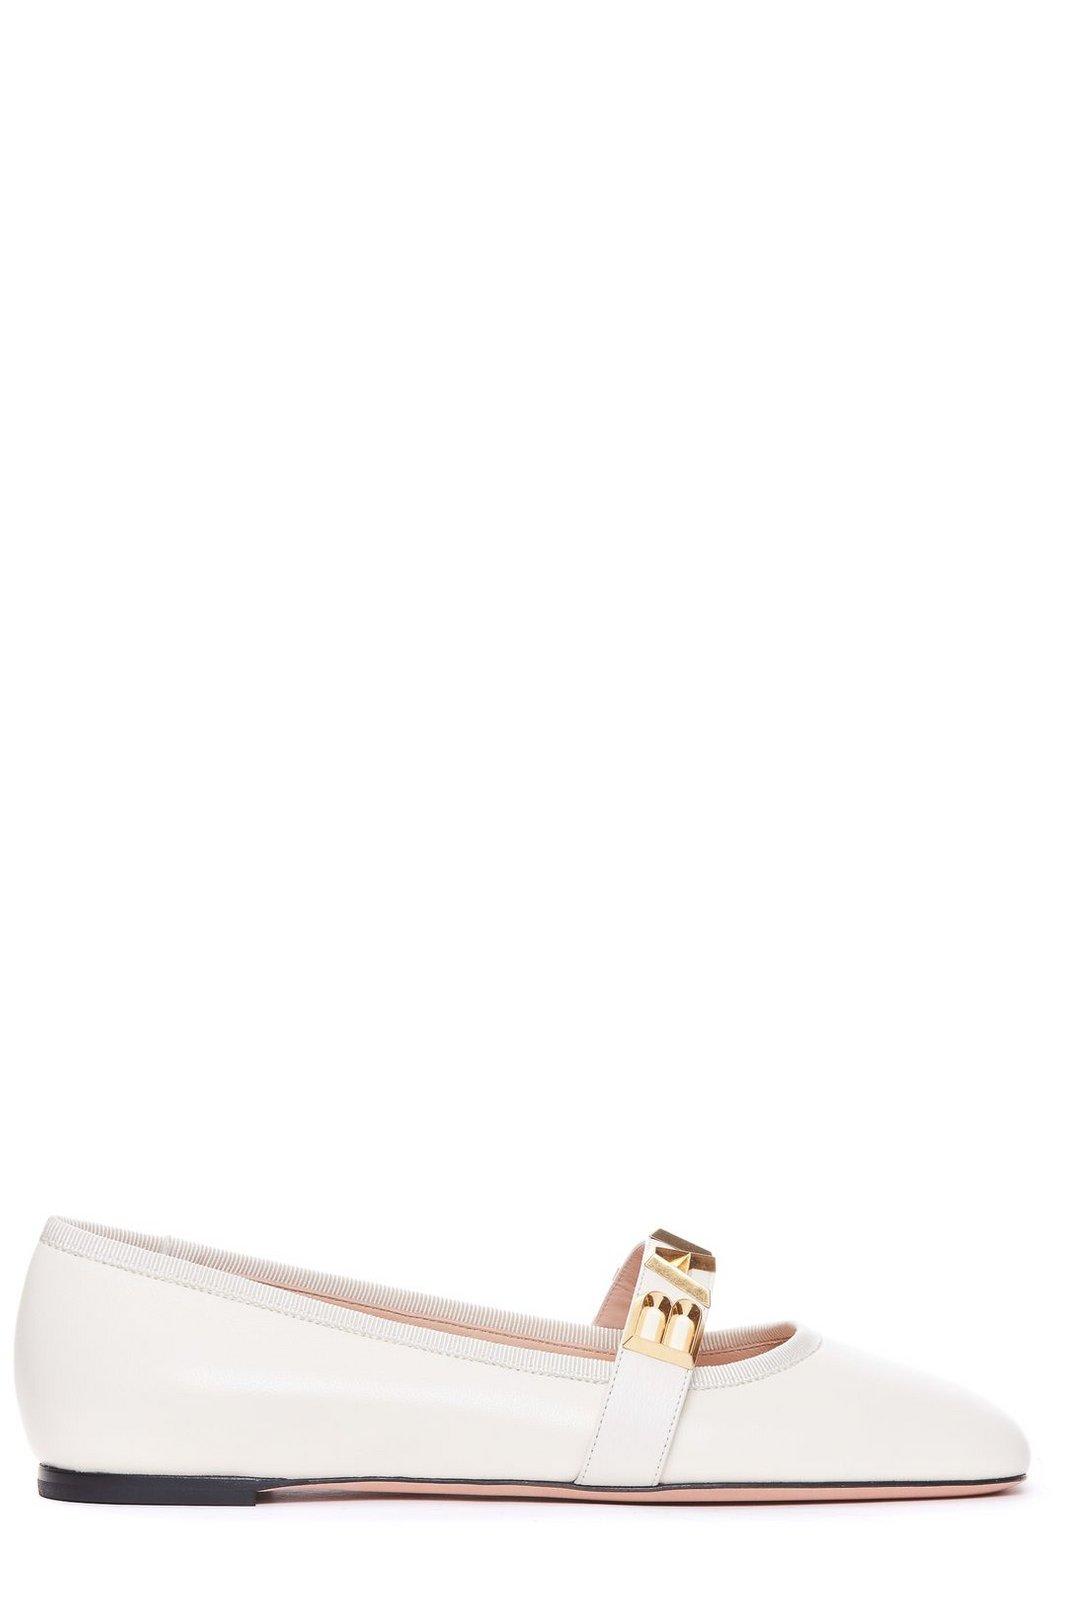 Bally Balby Squared Toe Ballet Flats In White